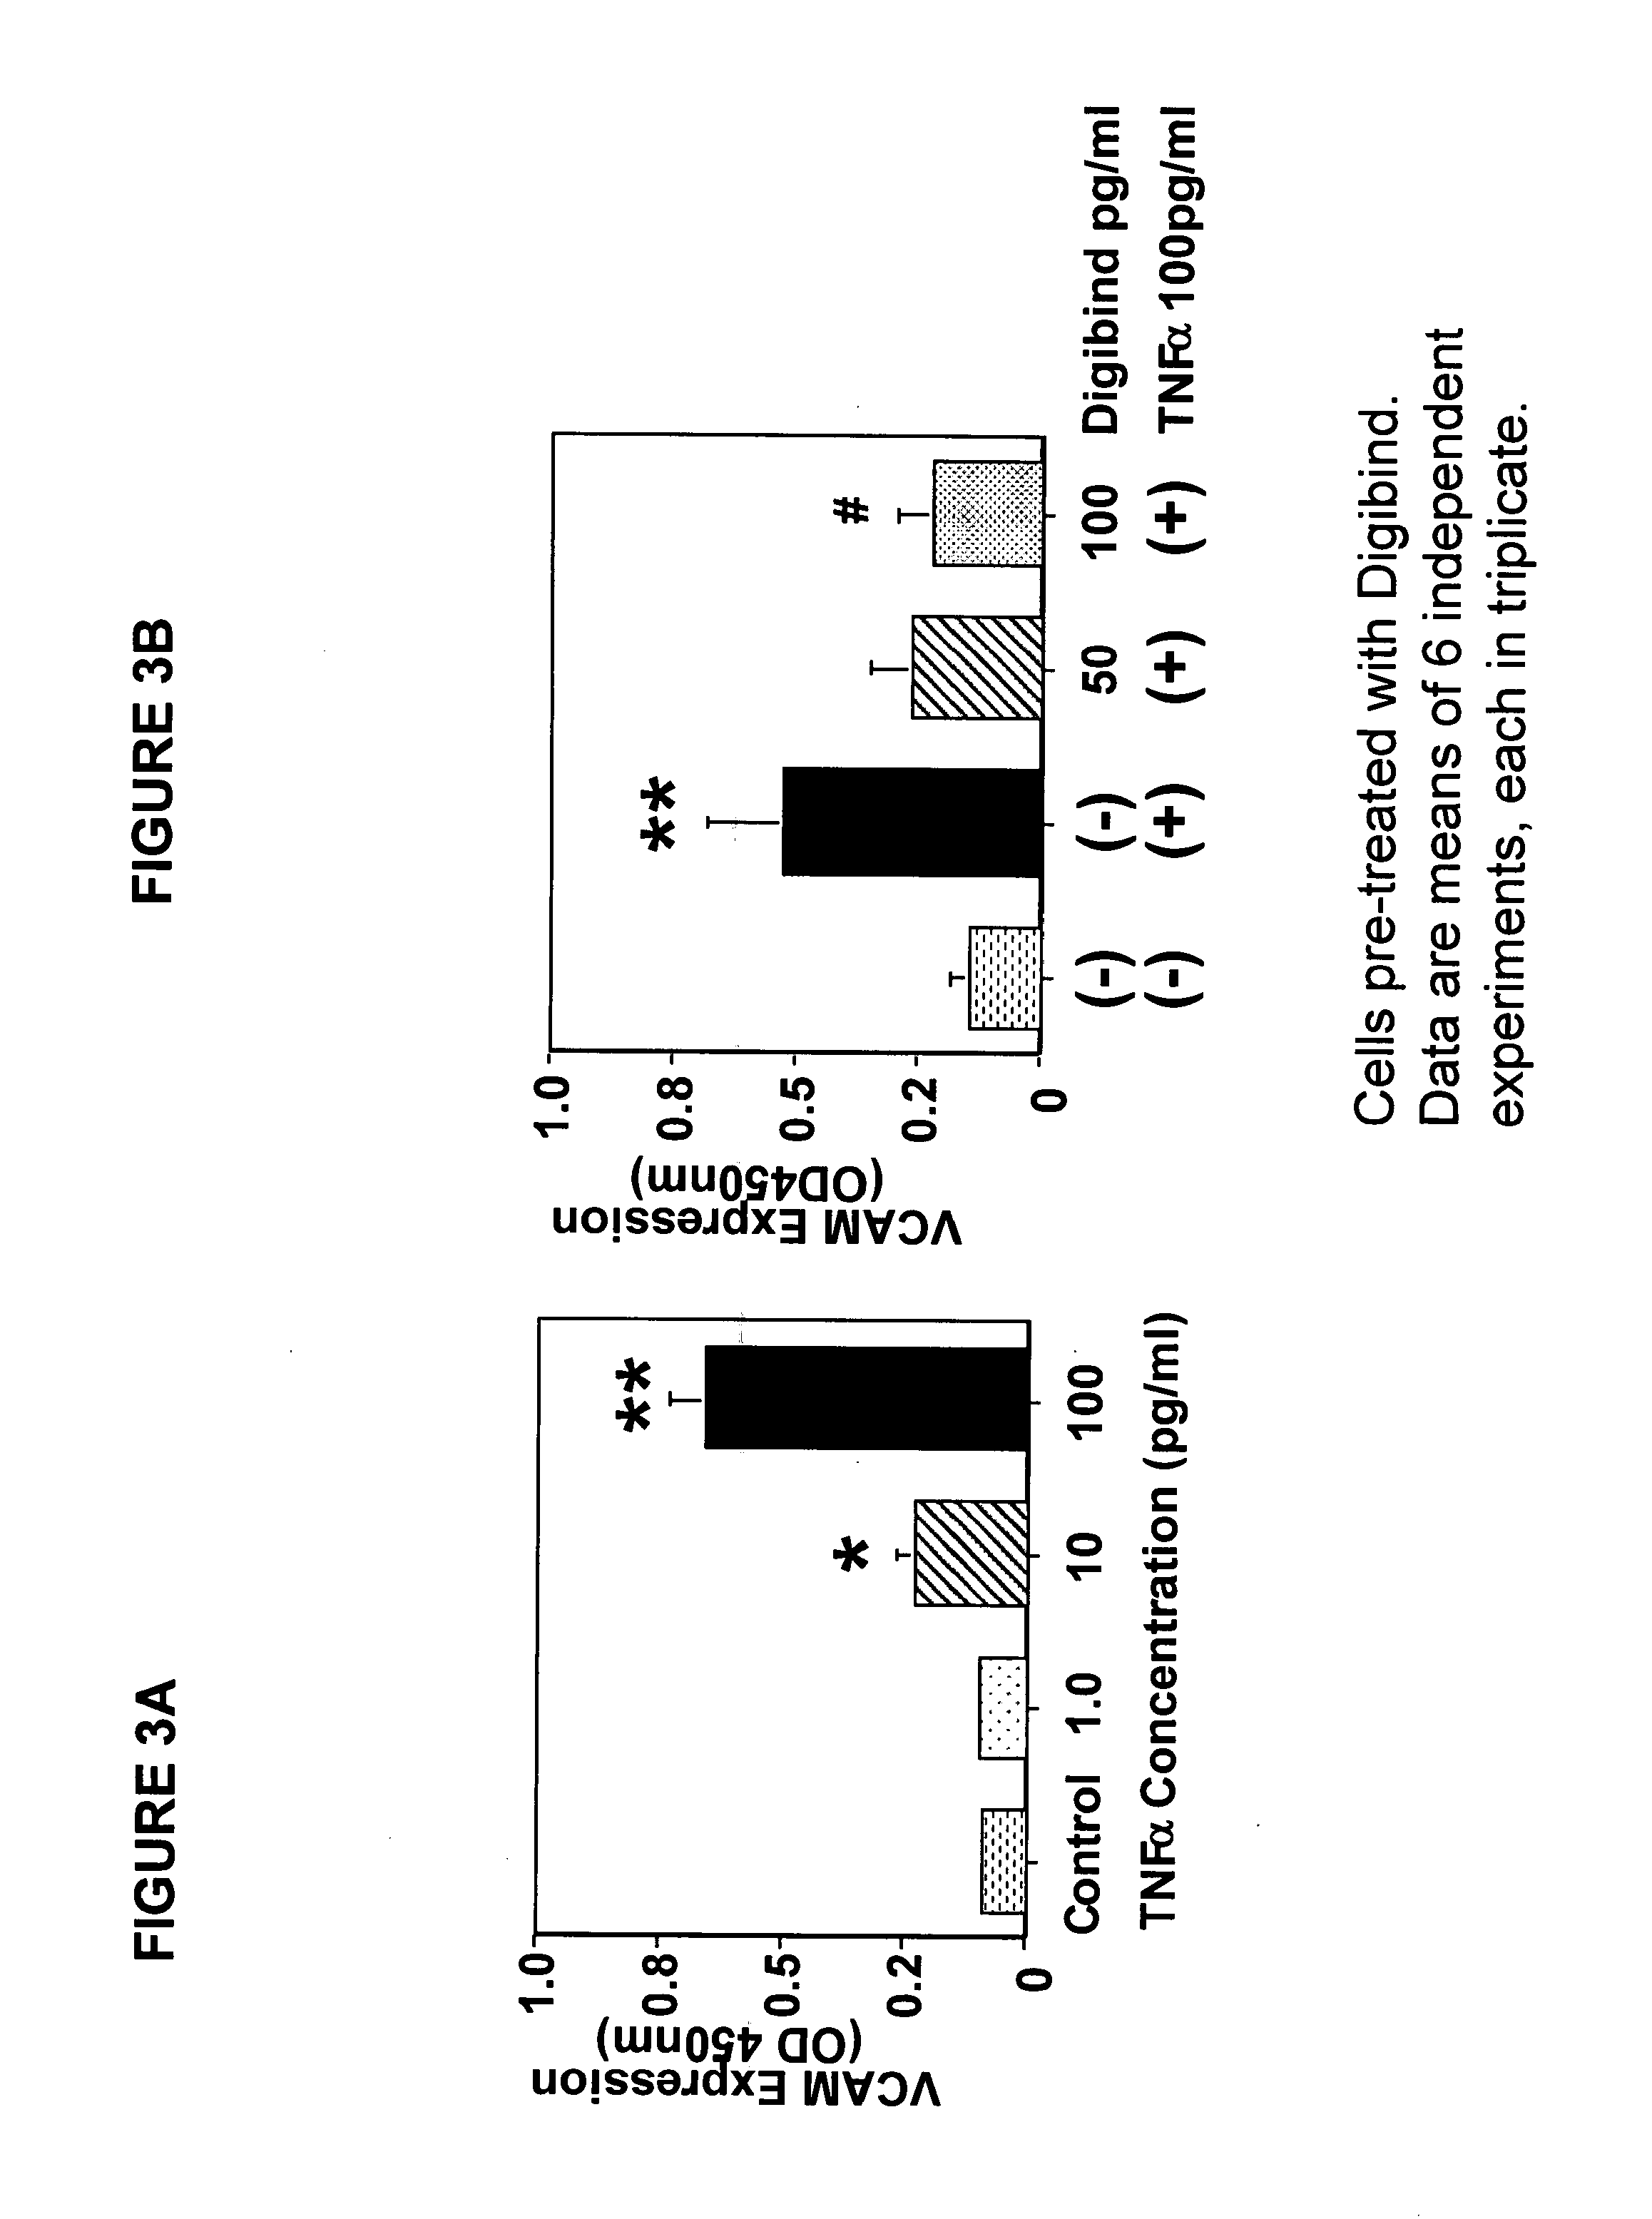 Composition for modulating the expression of cell adhesion molecules